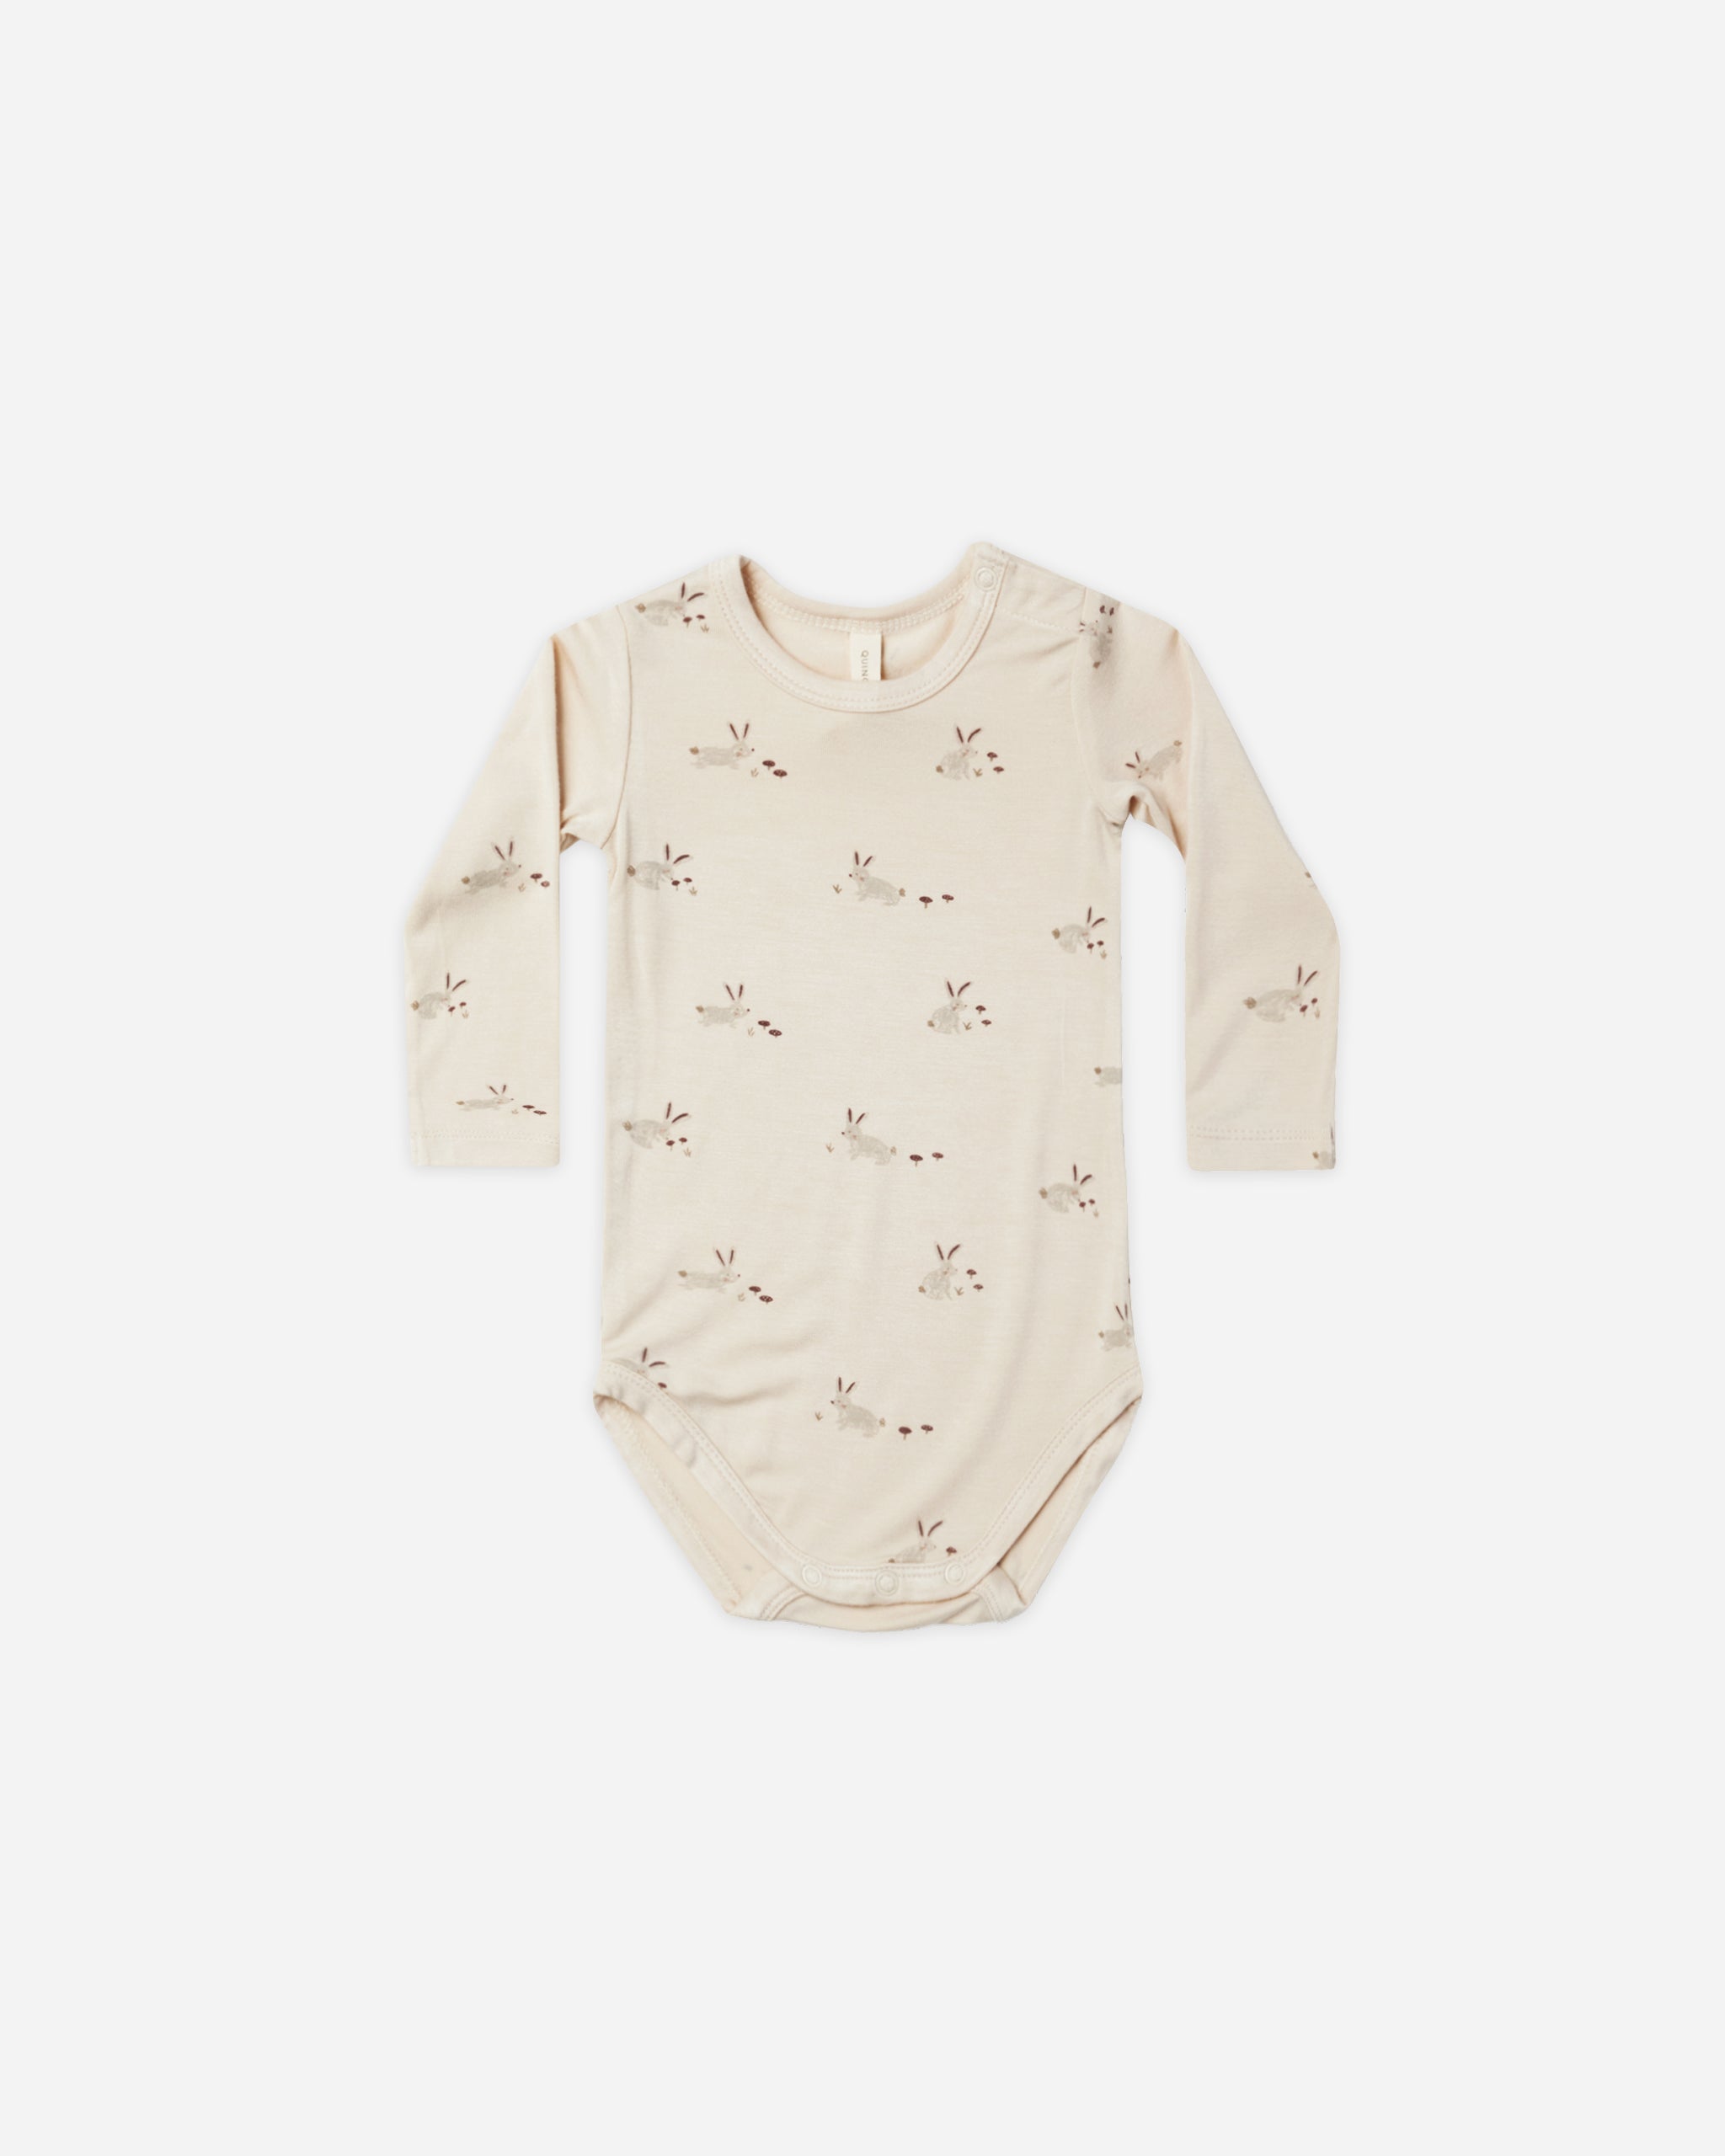 Bamboo Long Sleeve Bodysuit || Bunnies - Rylee + Cru | Kids Clothes | Trendy Baby Clothes | Modern Infant Outfits |